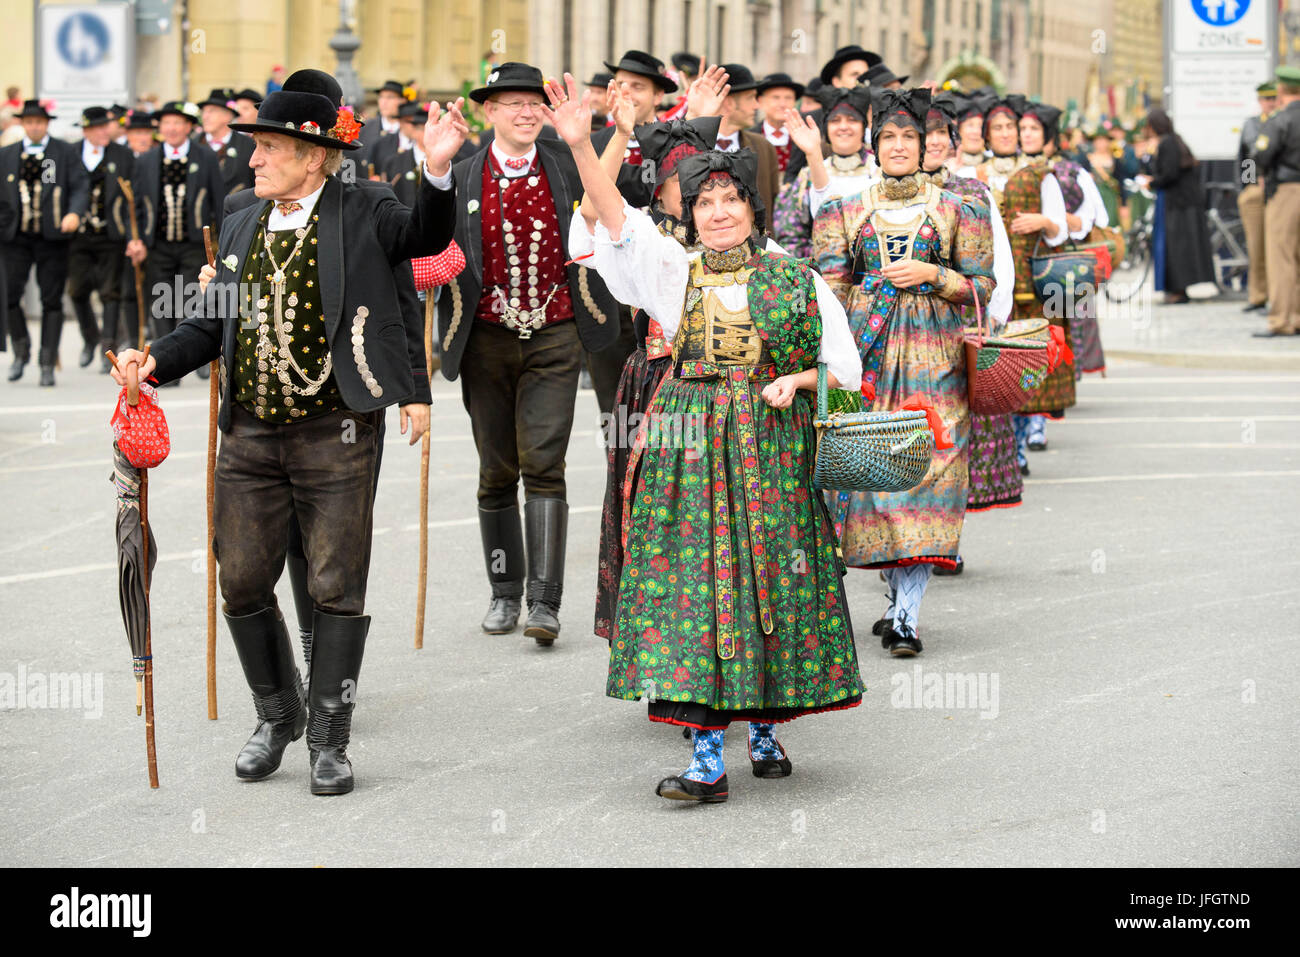 Oktoberfest in 2015 with traditional costumes and protection procession, historical traditional costume group of the 'Oide Wiesn fixed tent tradition', Stock Photo